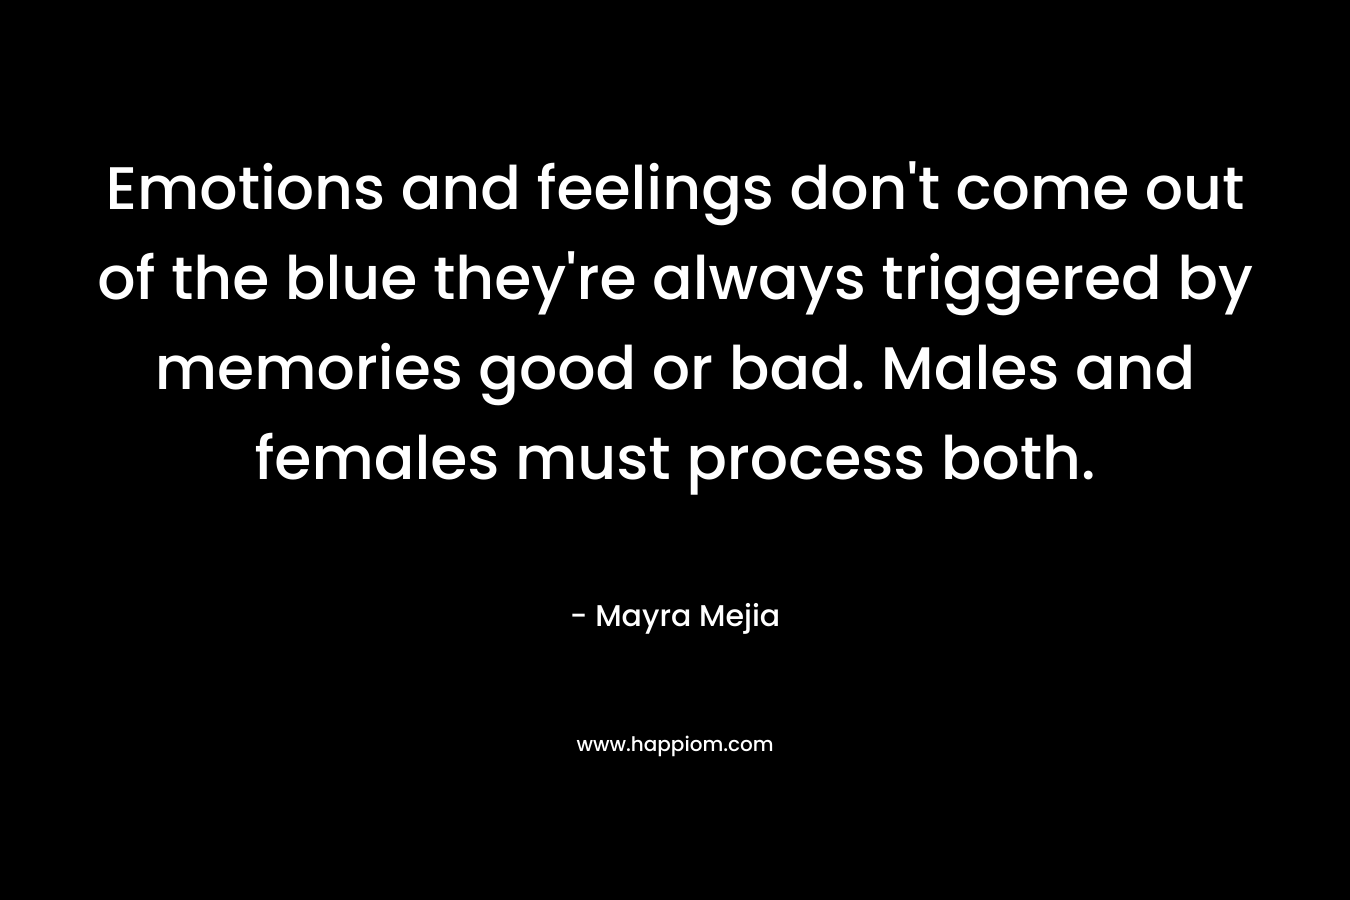 Emotions and feelings don’t come out of the blue they’re always triggered by memories good or bad. Males and females must process both. – Mayra Mejia